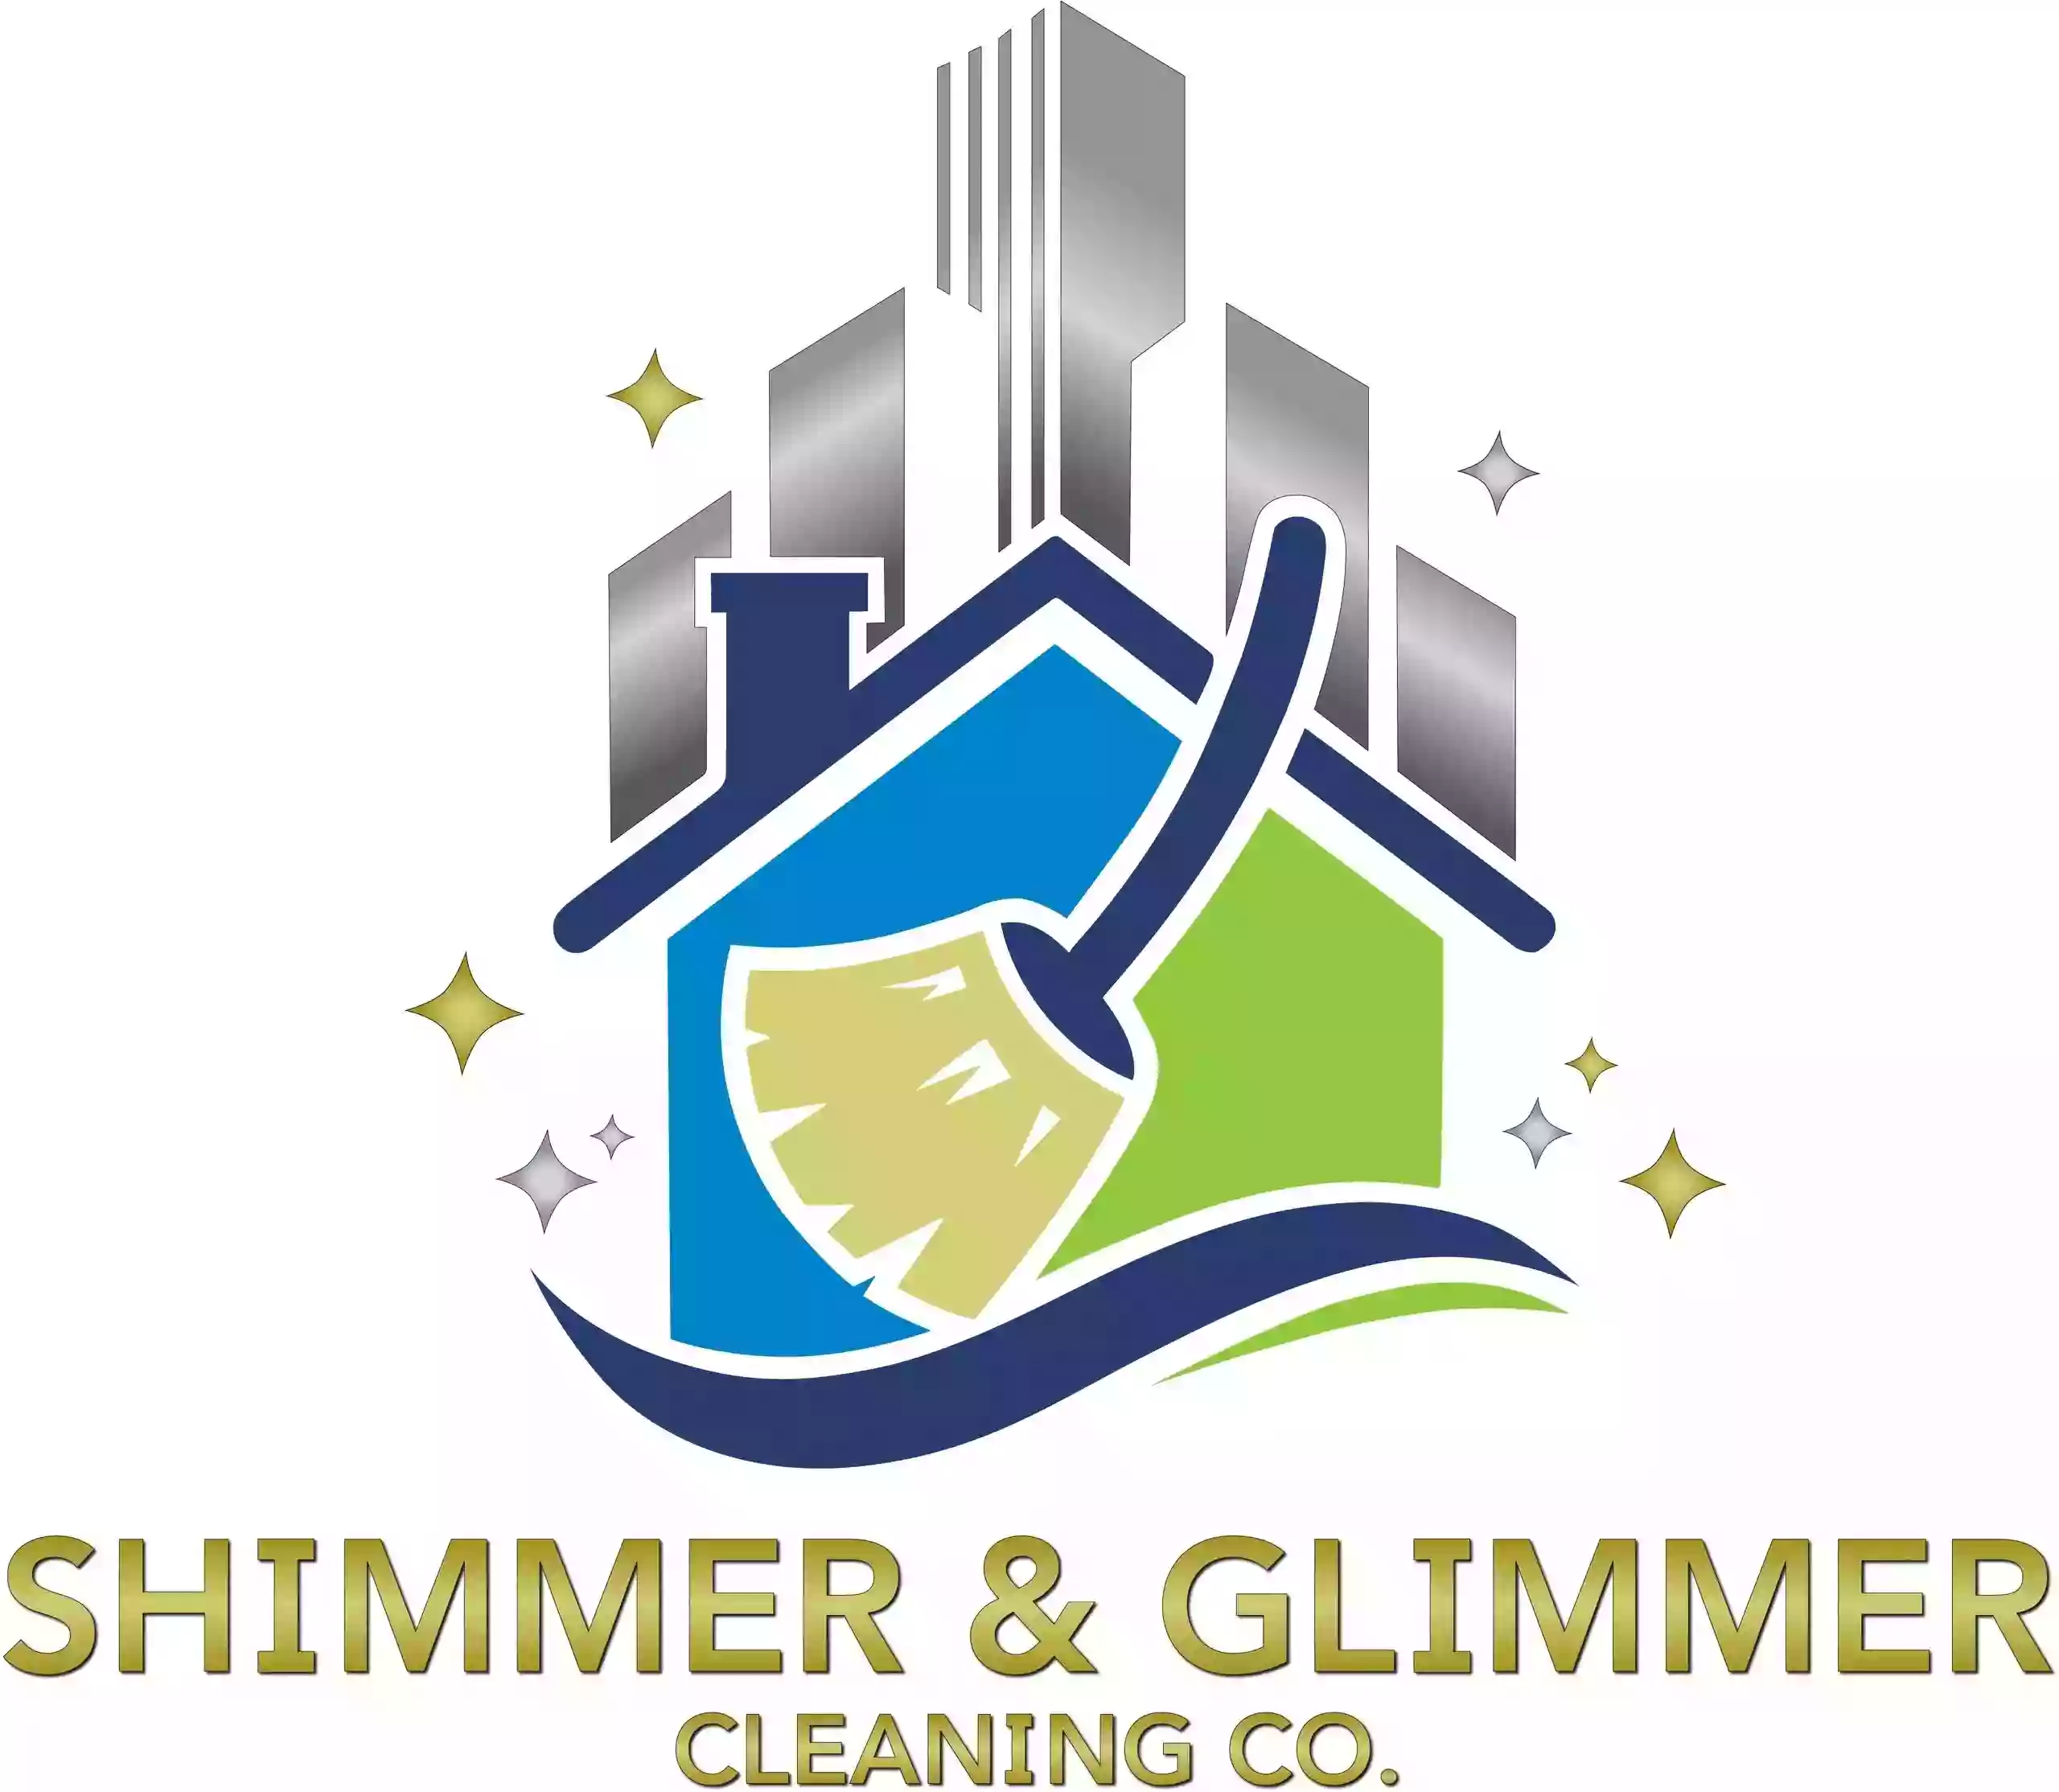 Shimmer & Glimmer Cleaning Service